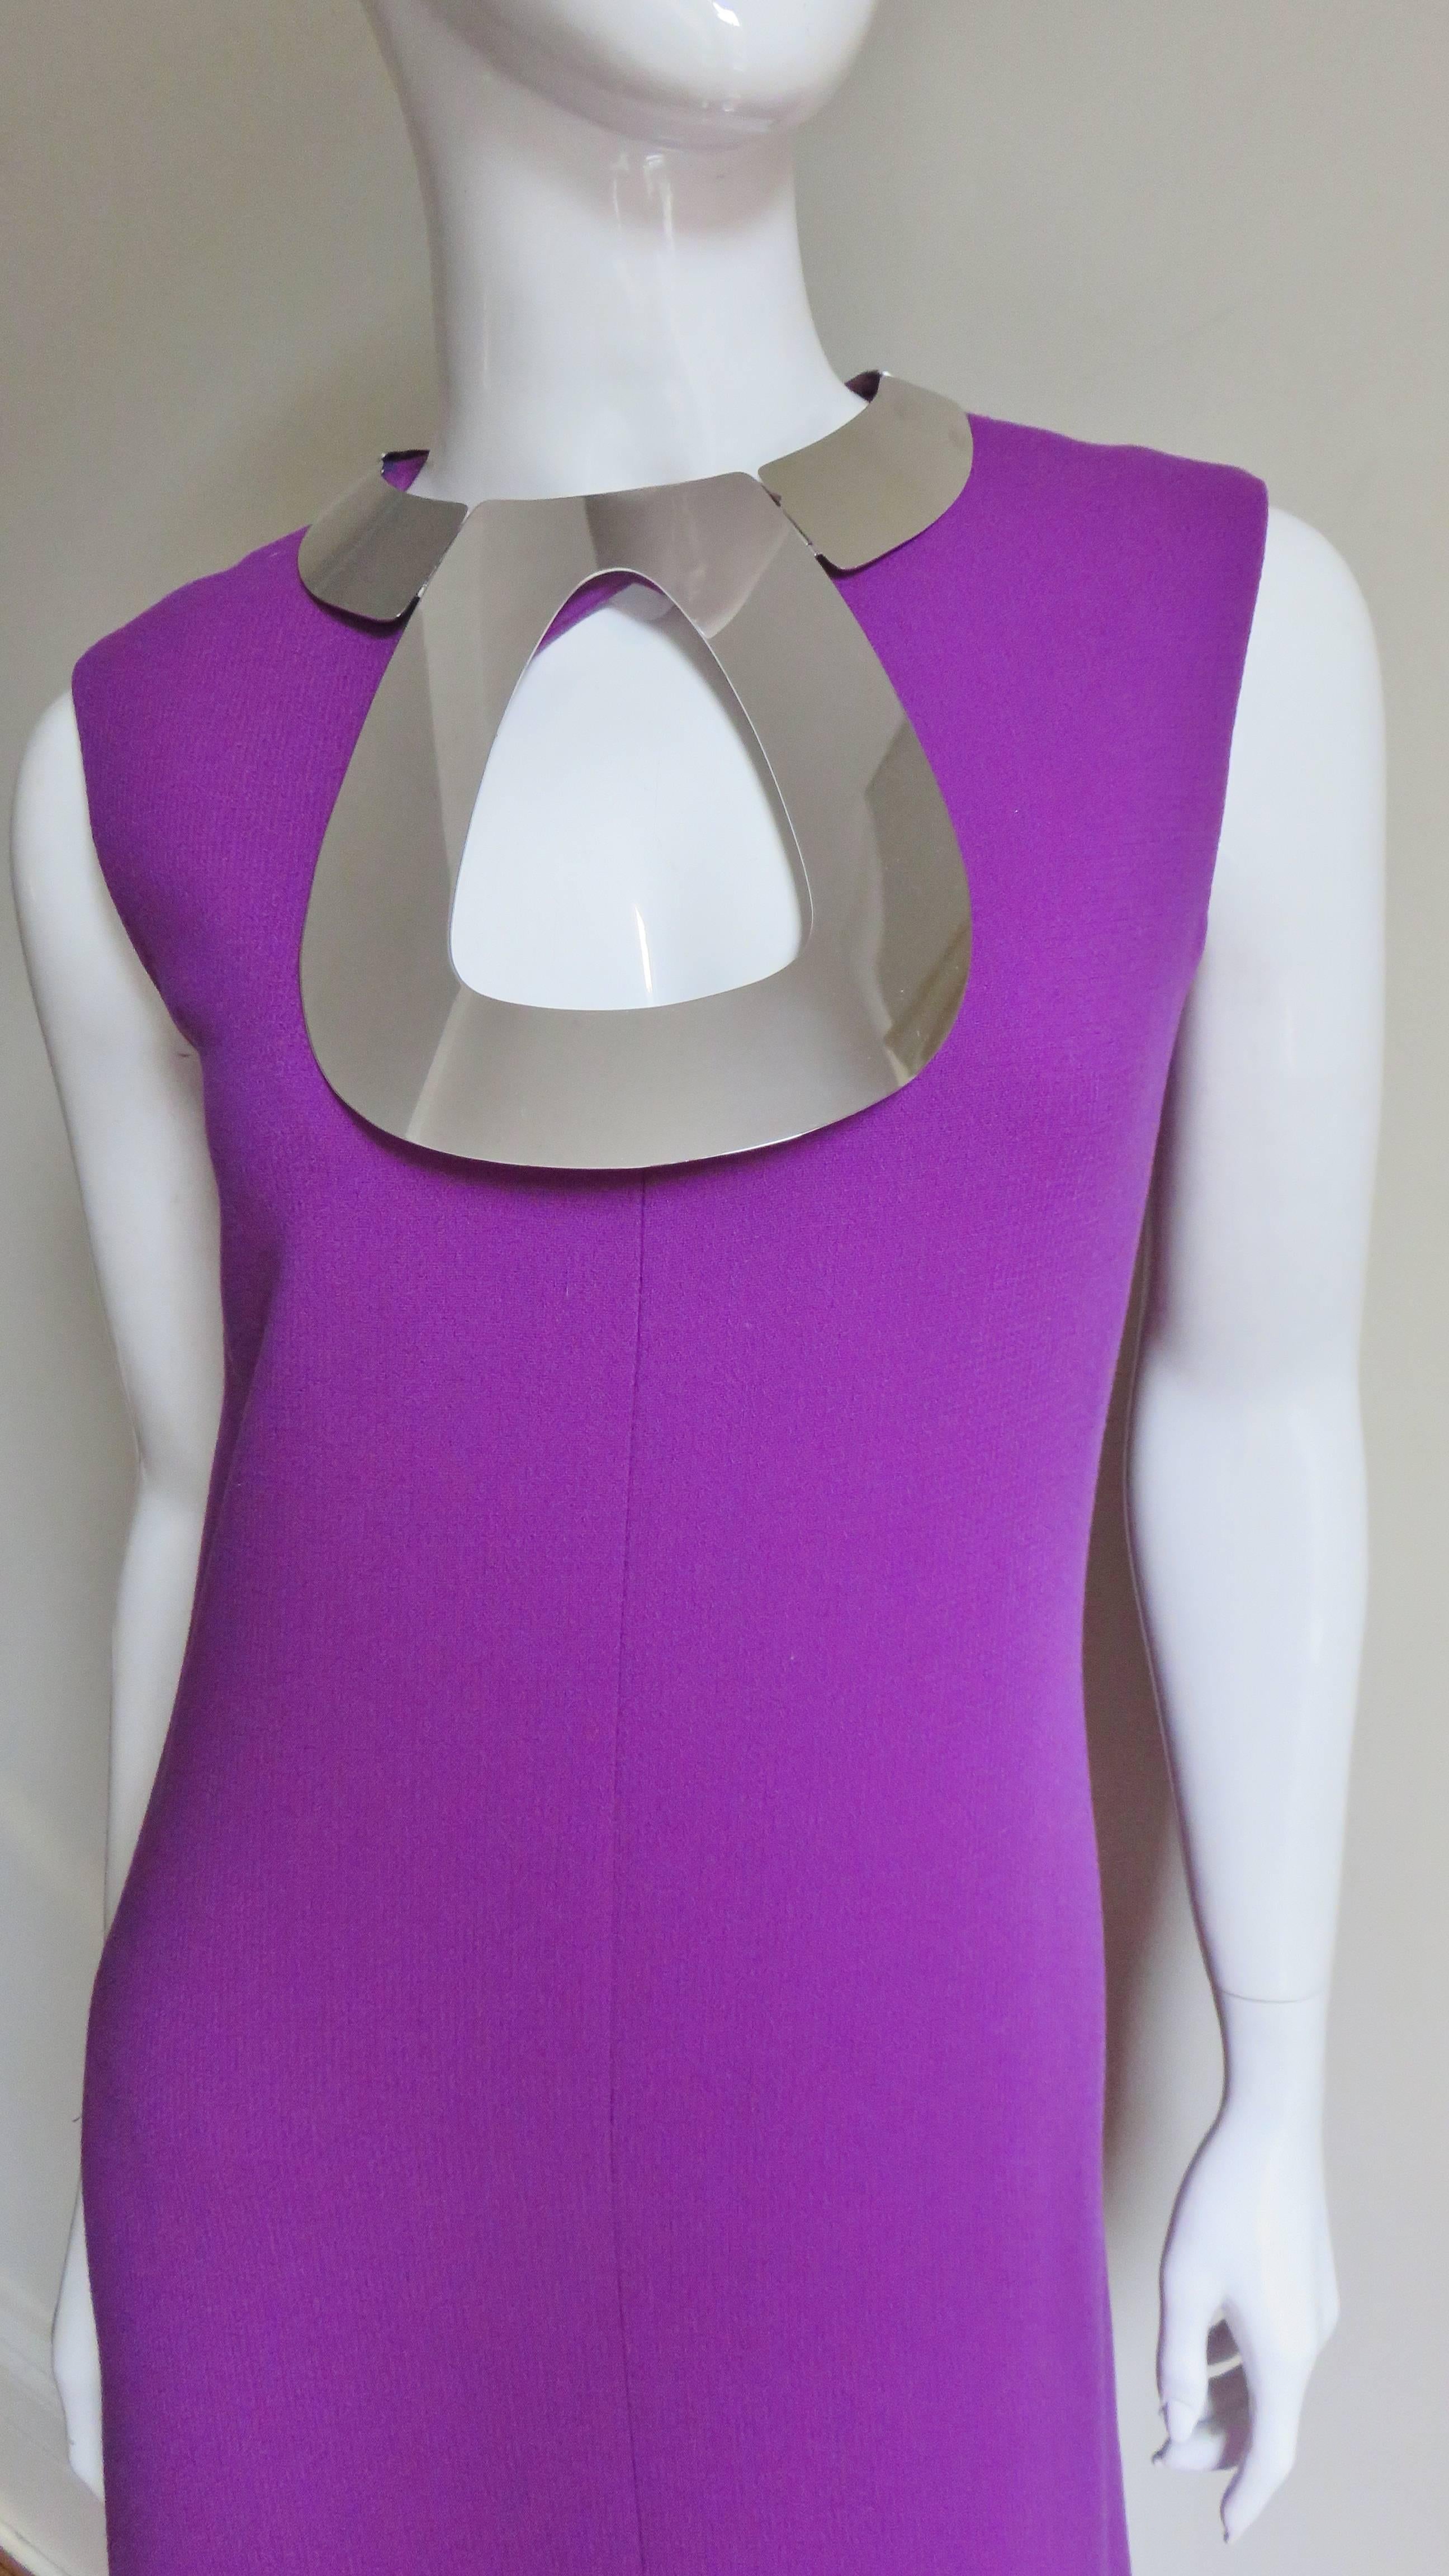 Am amazing dress purple wool dress from Pierre Cardin.  It is sleeveless, slightly fitted, midi length with a center front slit.  It has a stunning silver metal hardware articulating collar around the neckline and a large tear drop shaped cutout on